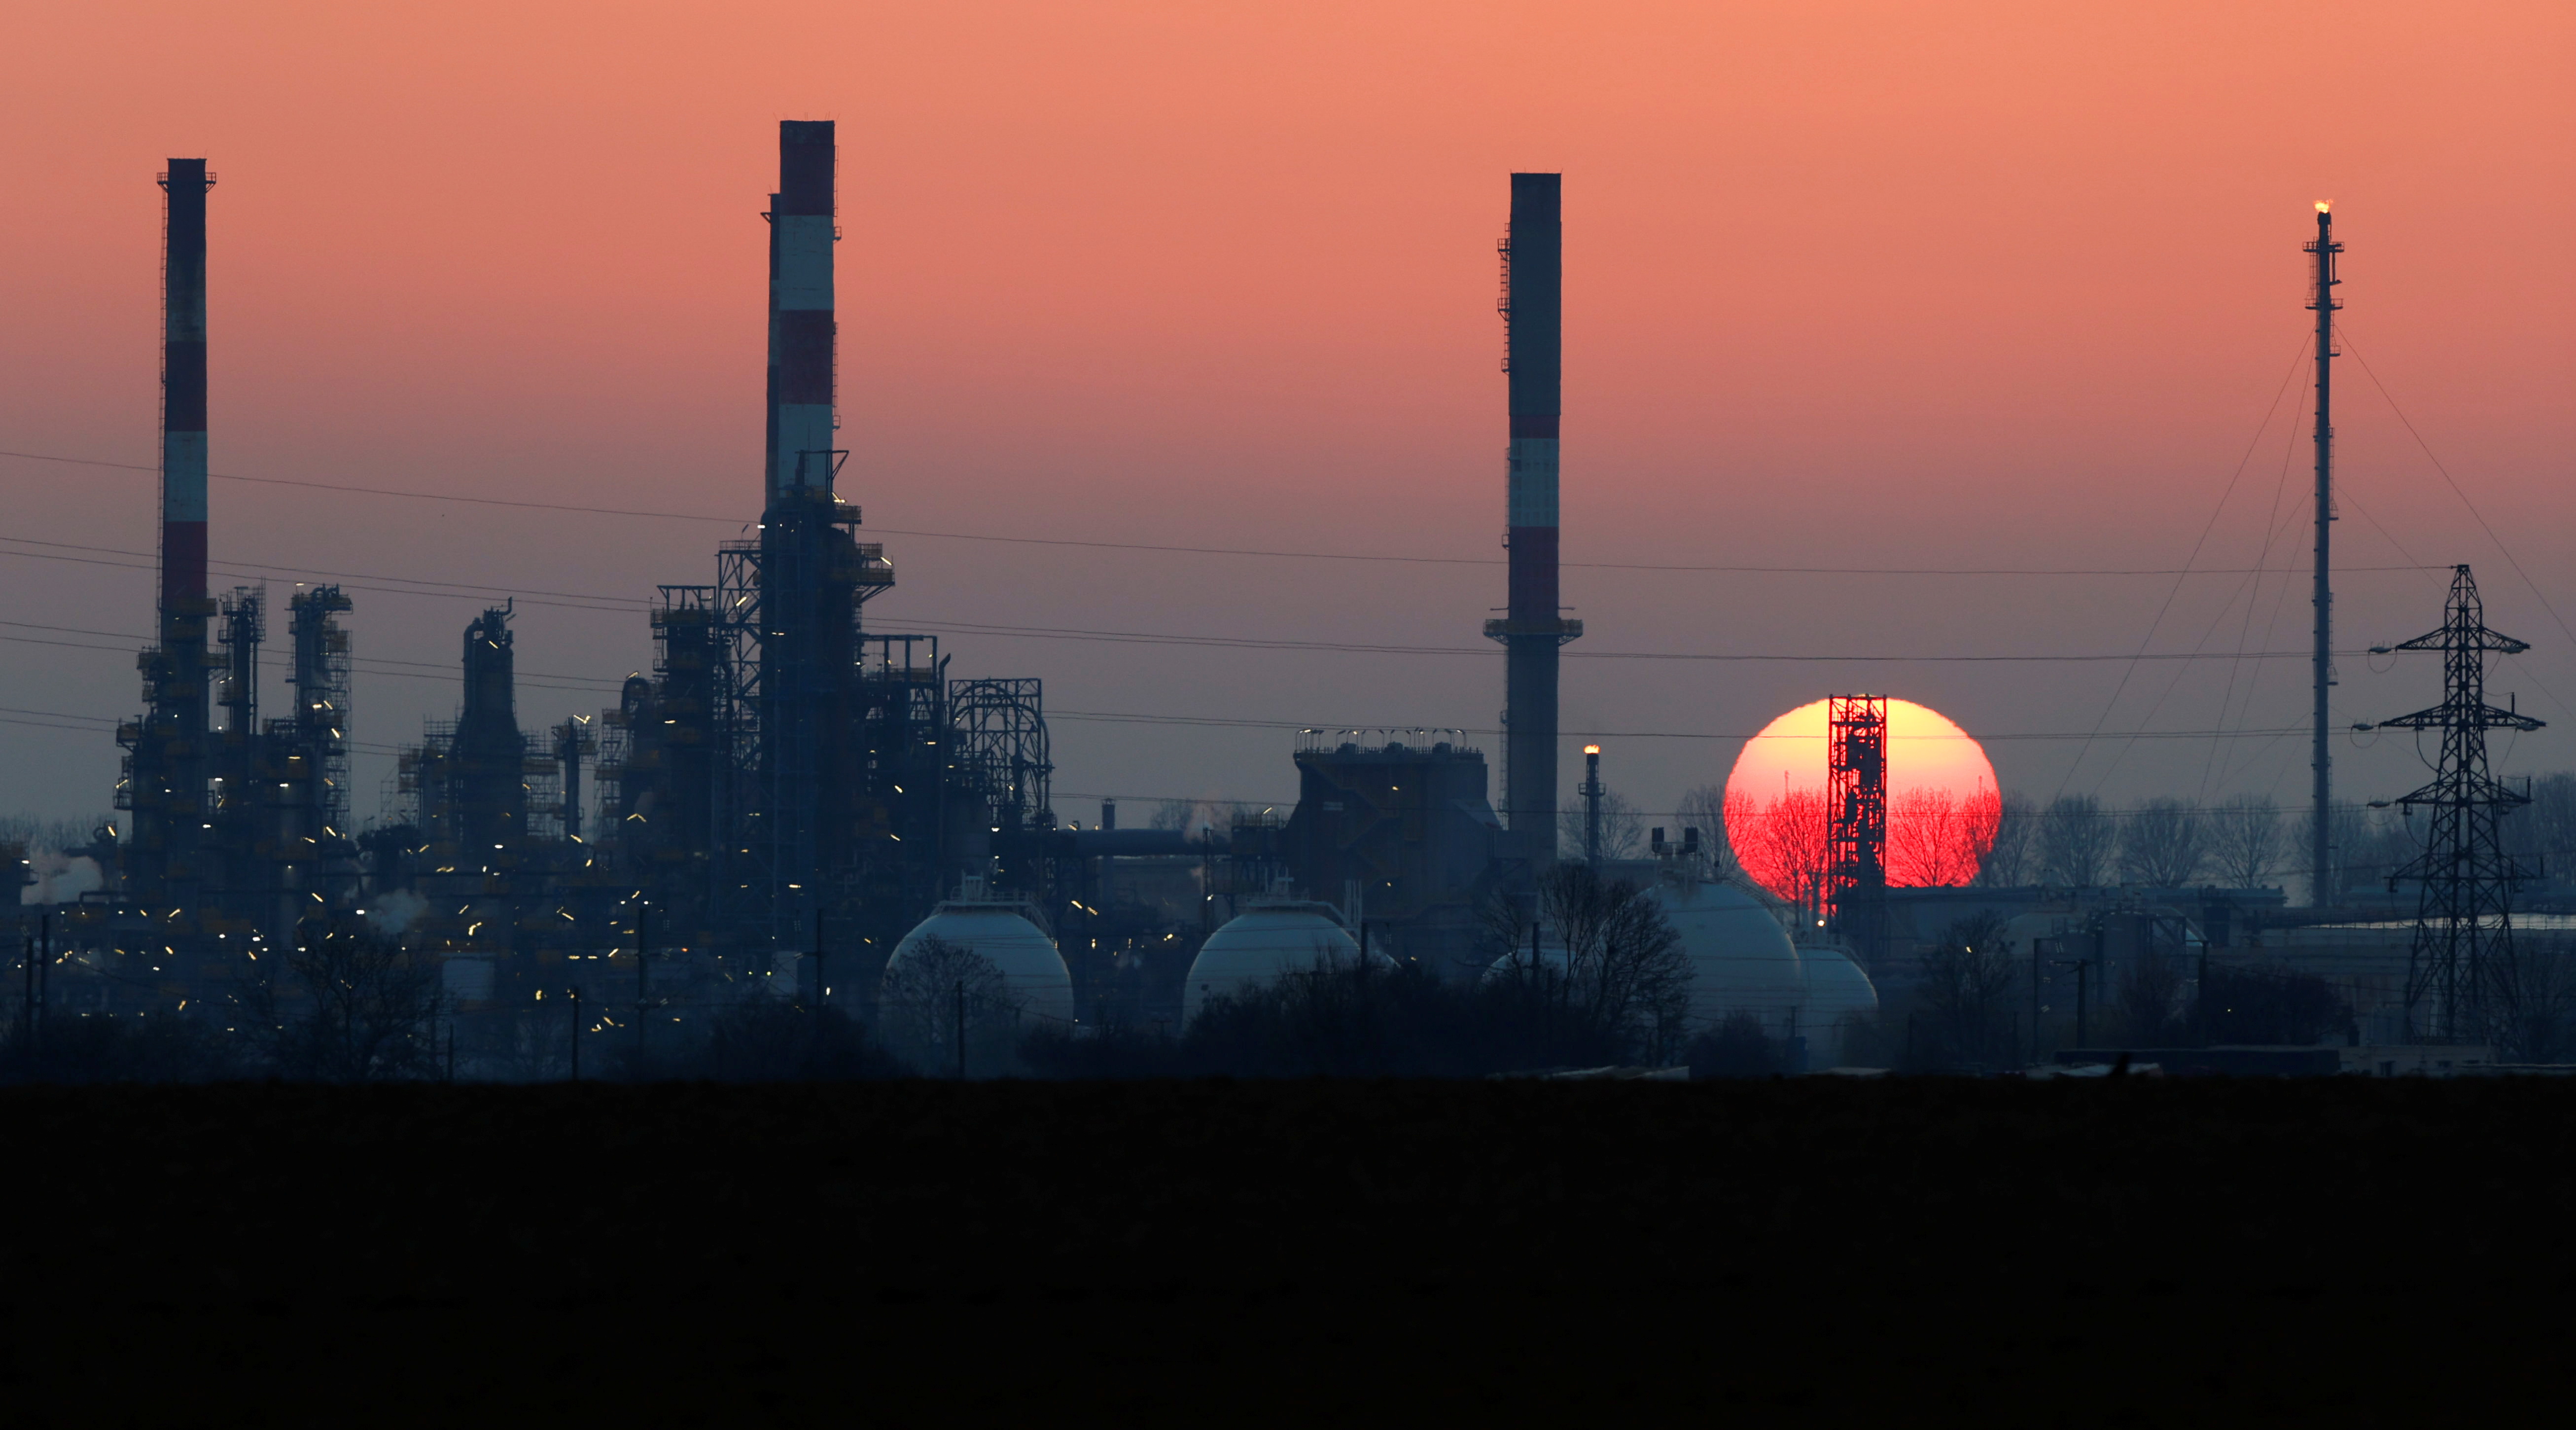 The sun sets behind the chimneys of the Total Grandpuits oil refinery, southeast of Paris, France, March 1, 2021.  REUTERS/Christian Hartmann